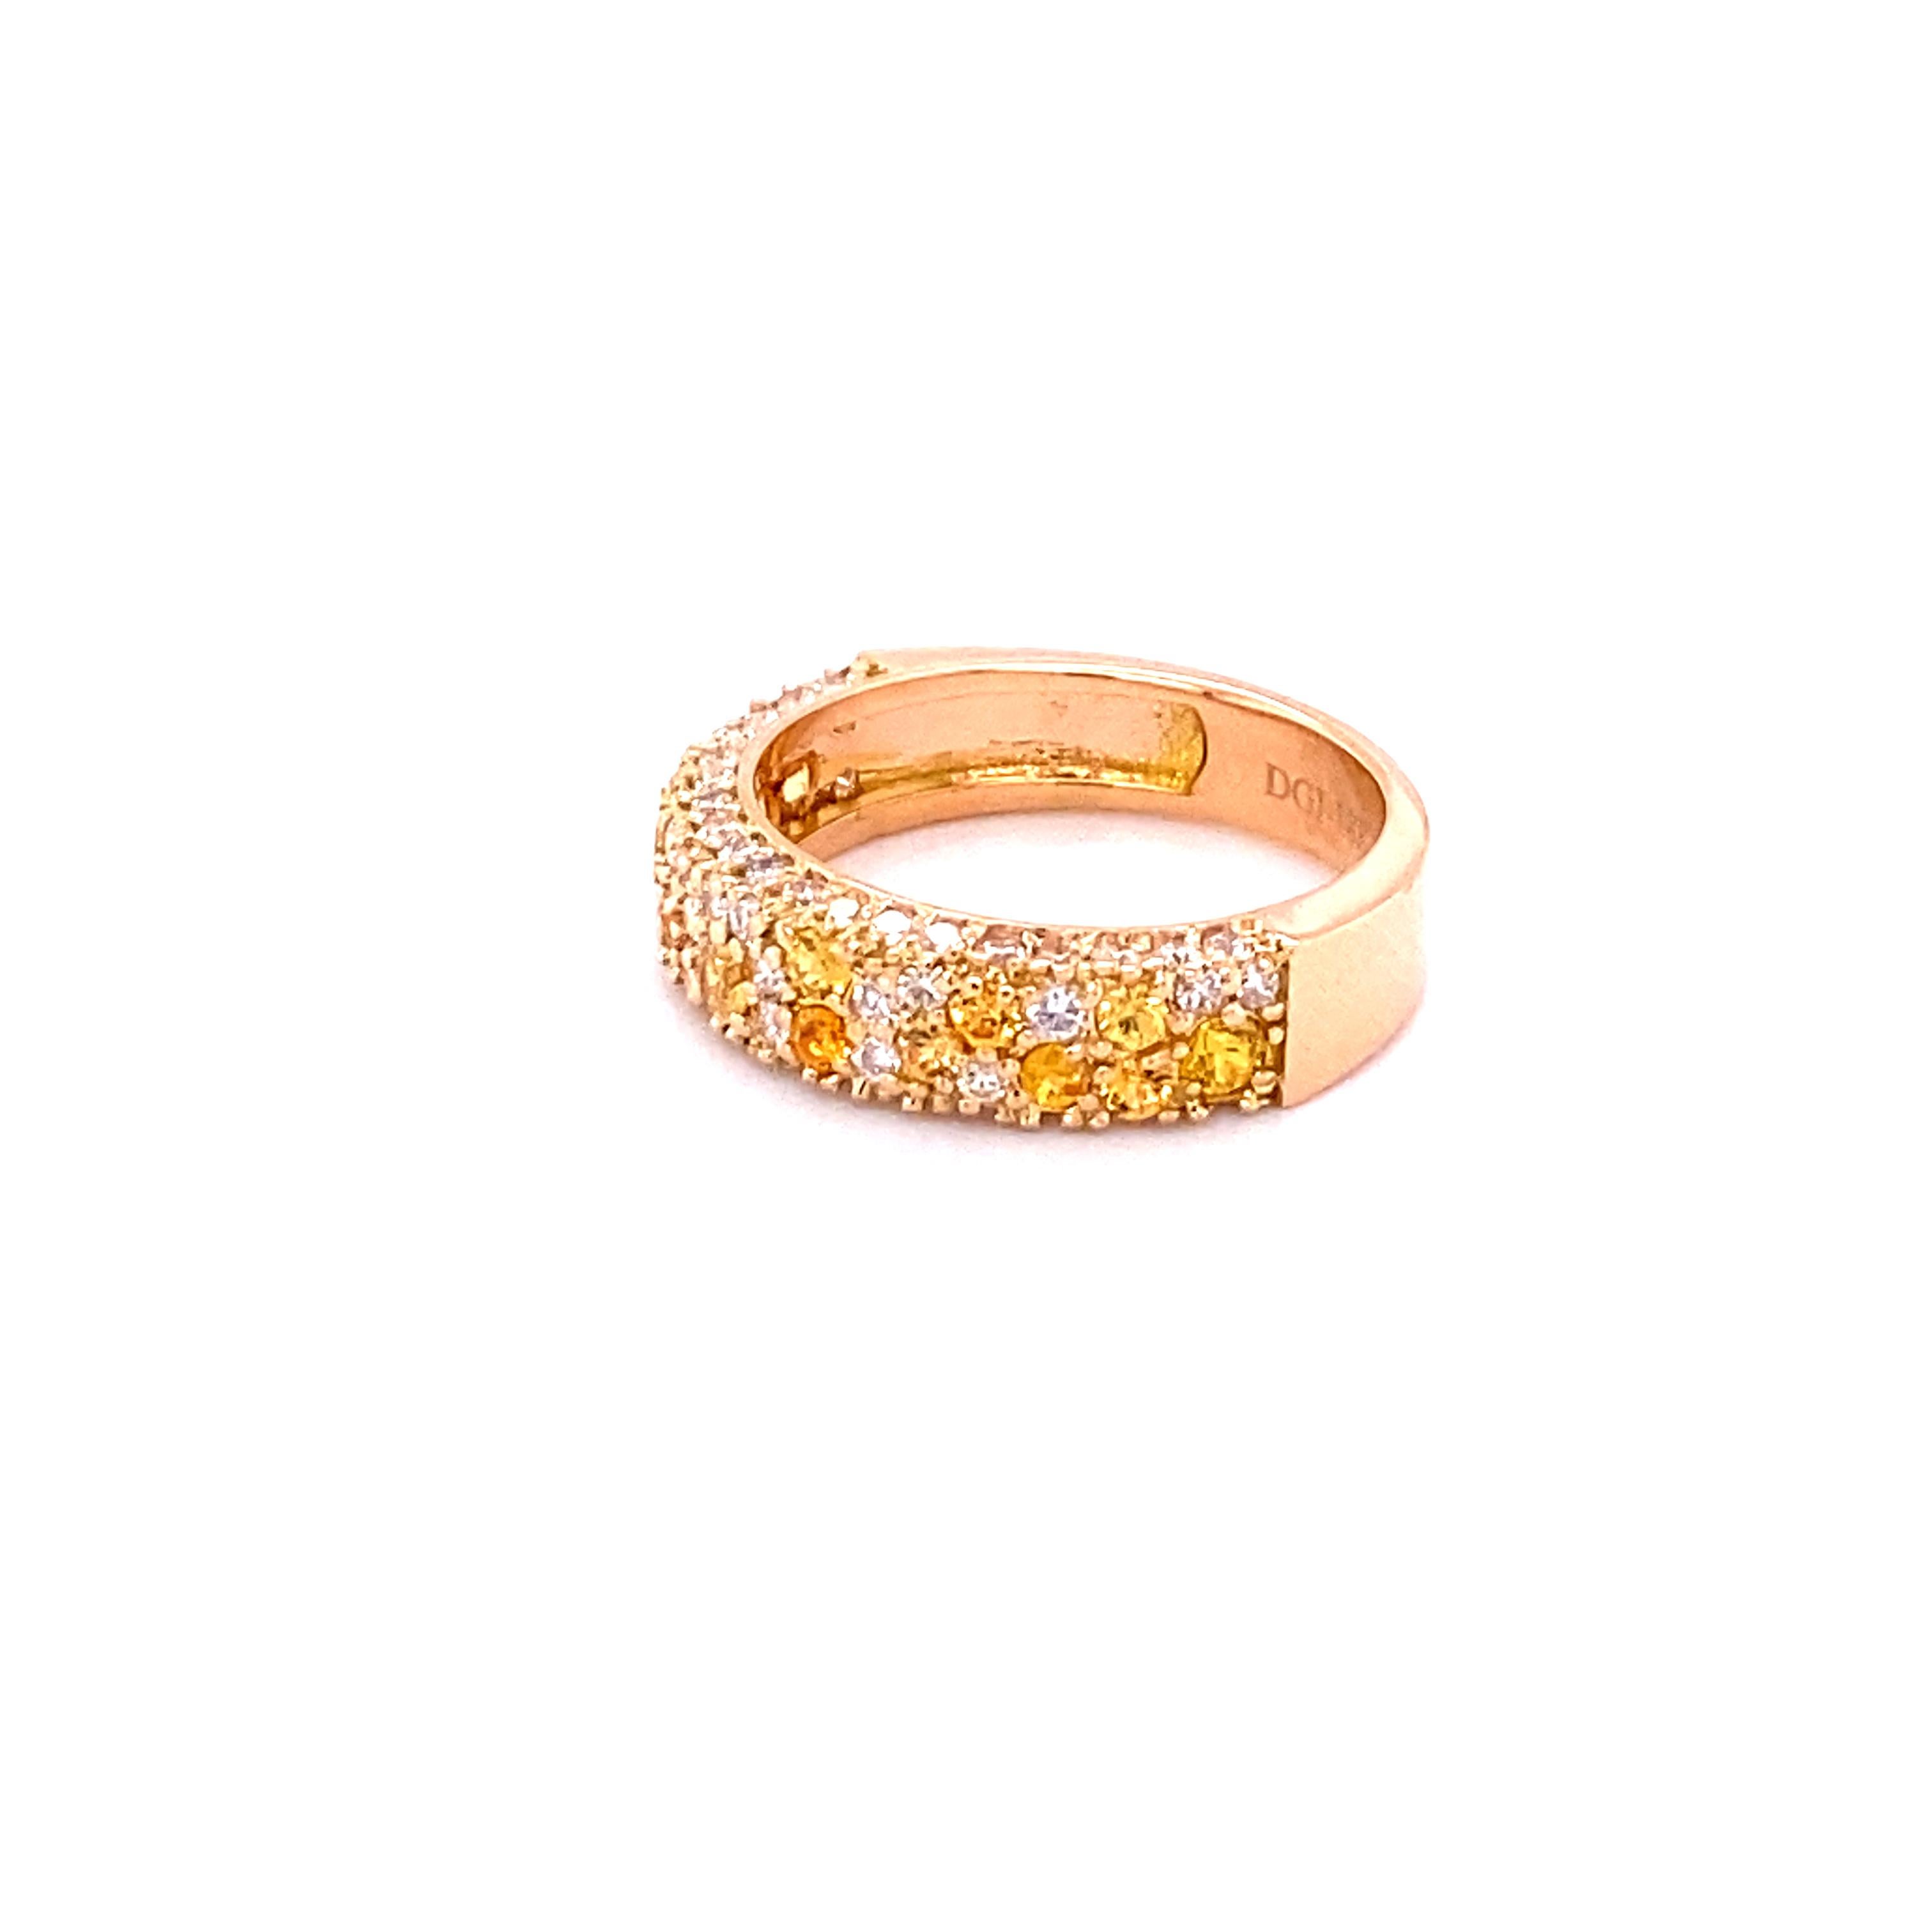 This Yellow Sapphire and White Diamond Band is stunning and versatile! Can be worn as a wedding or engagement band or as a gorgeous cocktail ring or an everyday stunner! 

There are 59 Round Cut Diamonds that weigh 0.75 Carats and 16 Round Cut